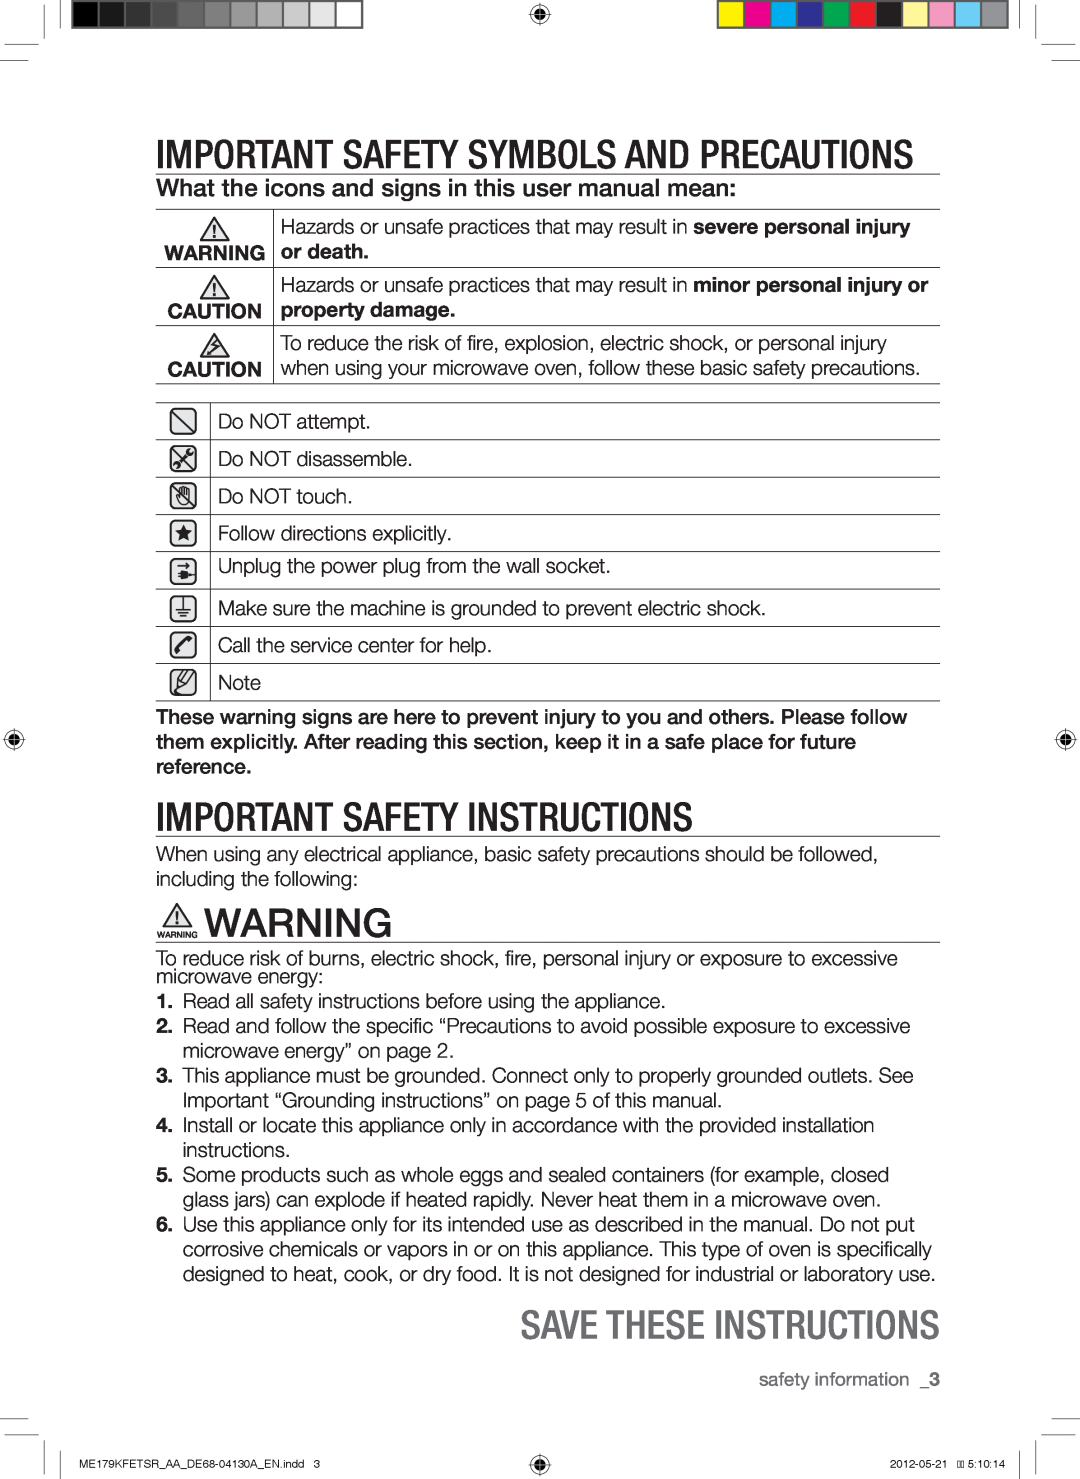 Samsung ME179KFETSR Important Safety Instructions, Save These Instructions, Important Safety Symbols And Precautions 